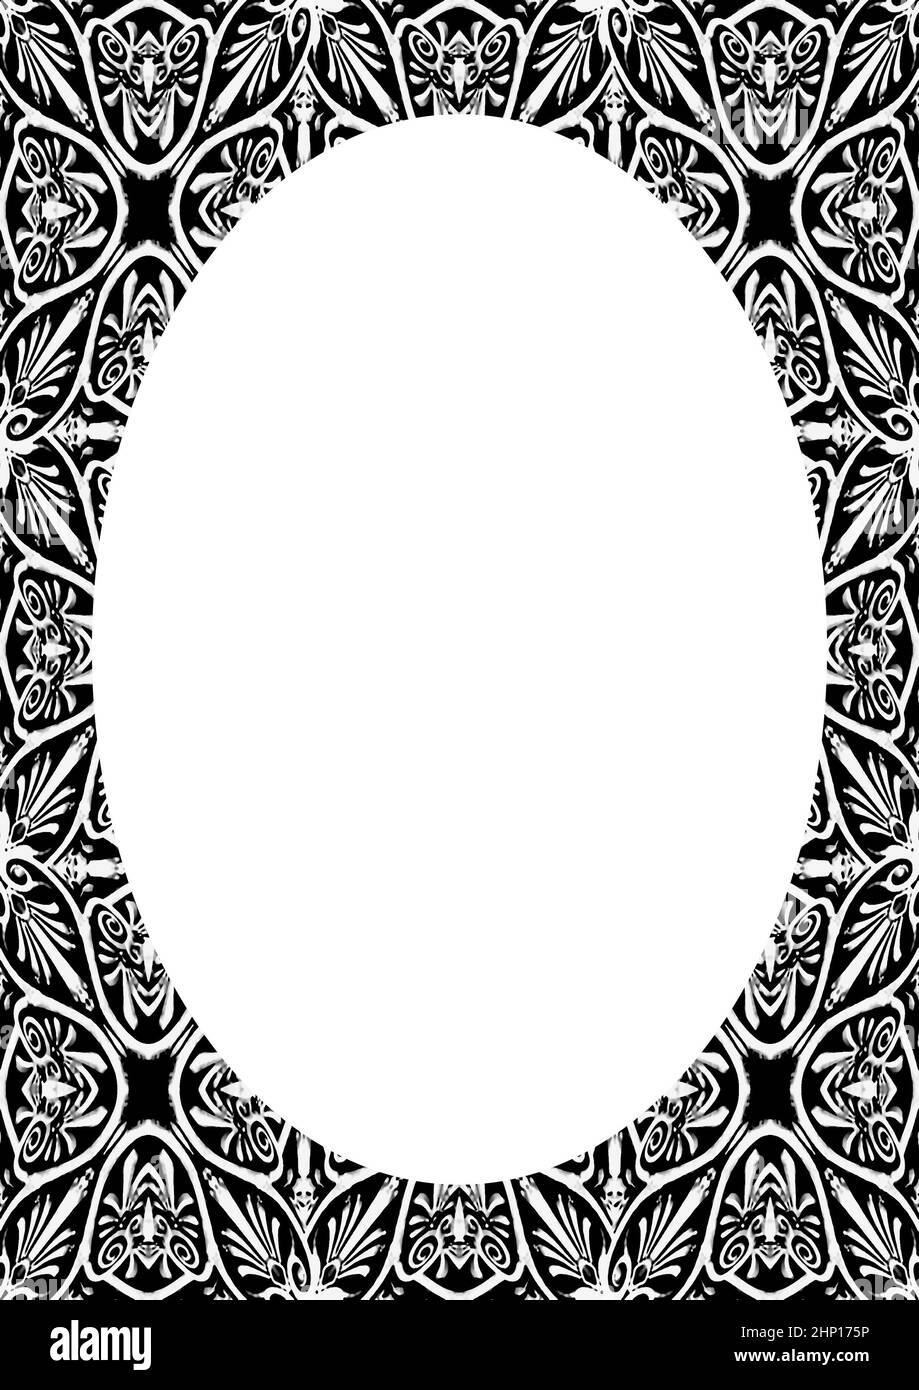 White circle frame background with decorated design borders Stock Photo